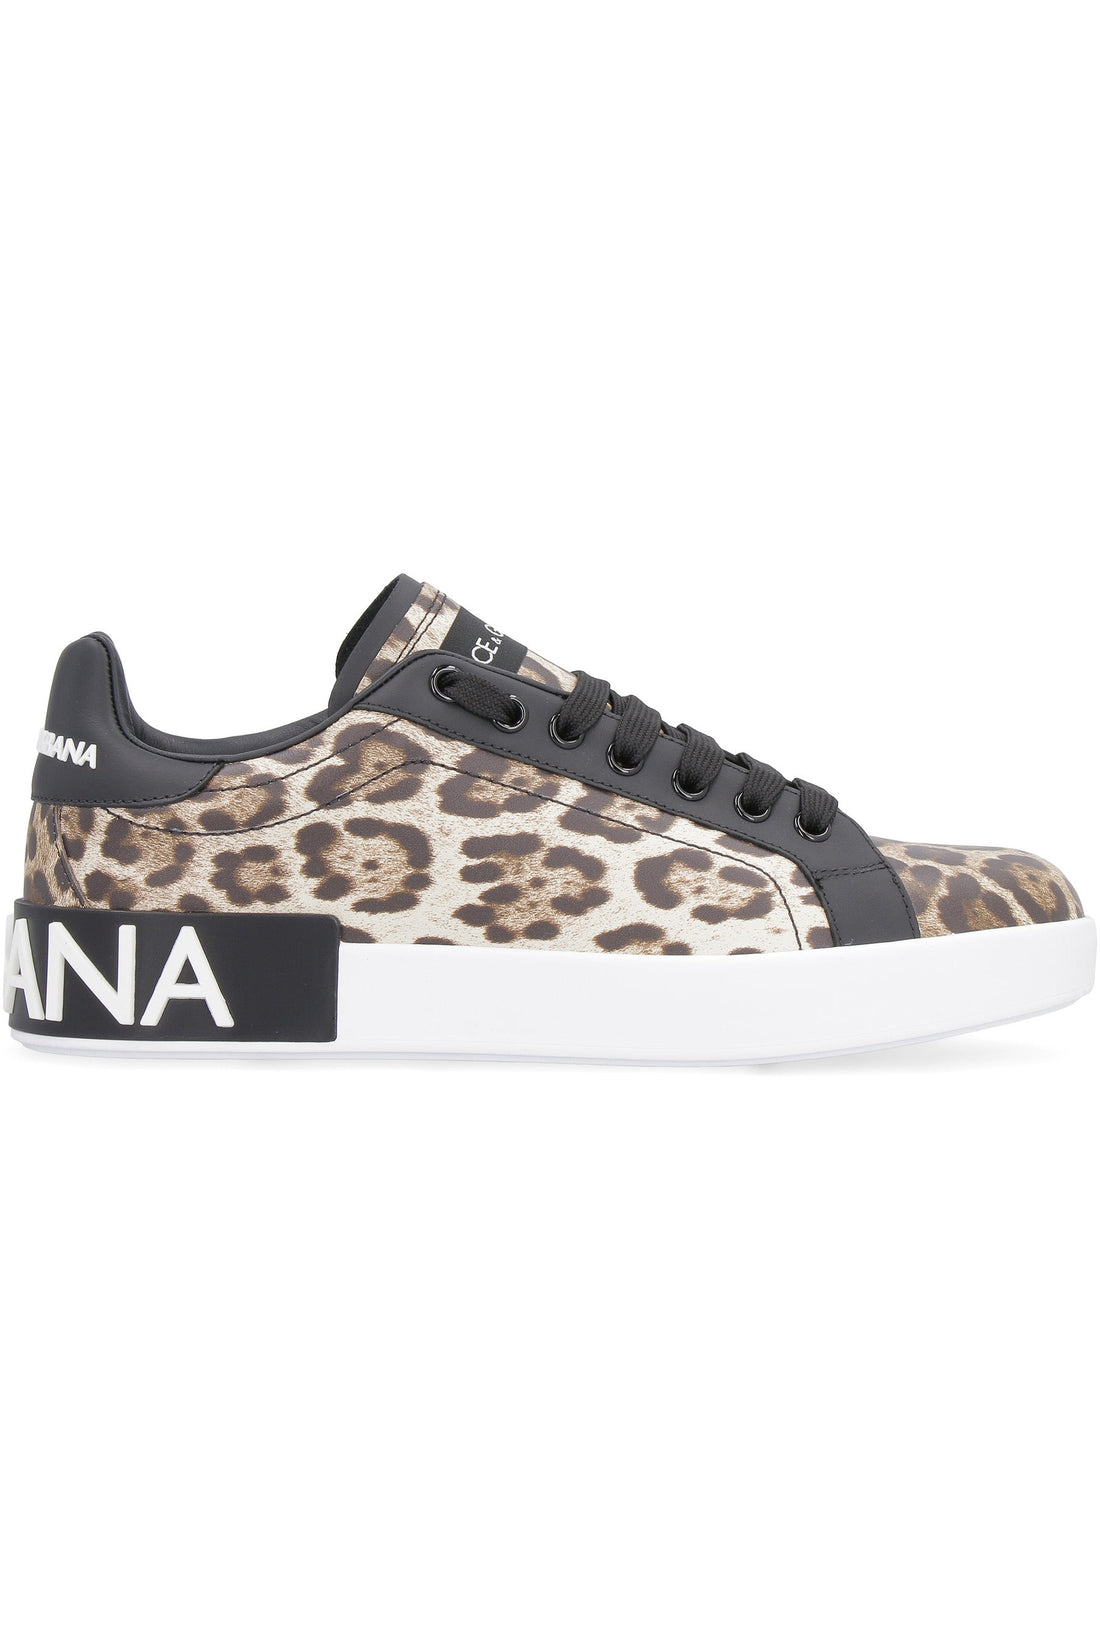 Dolce & Gabbana-OUTLET-SALE-Printed leather sneakers-ARCHIVIST